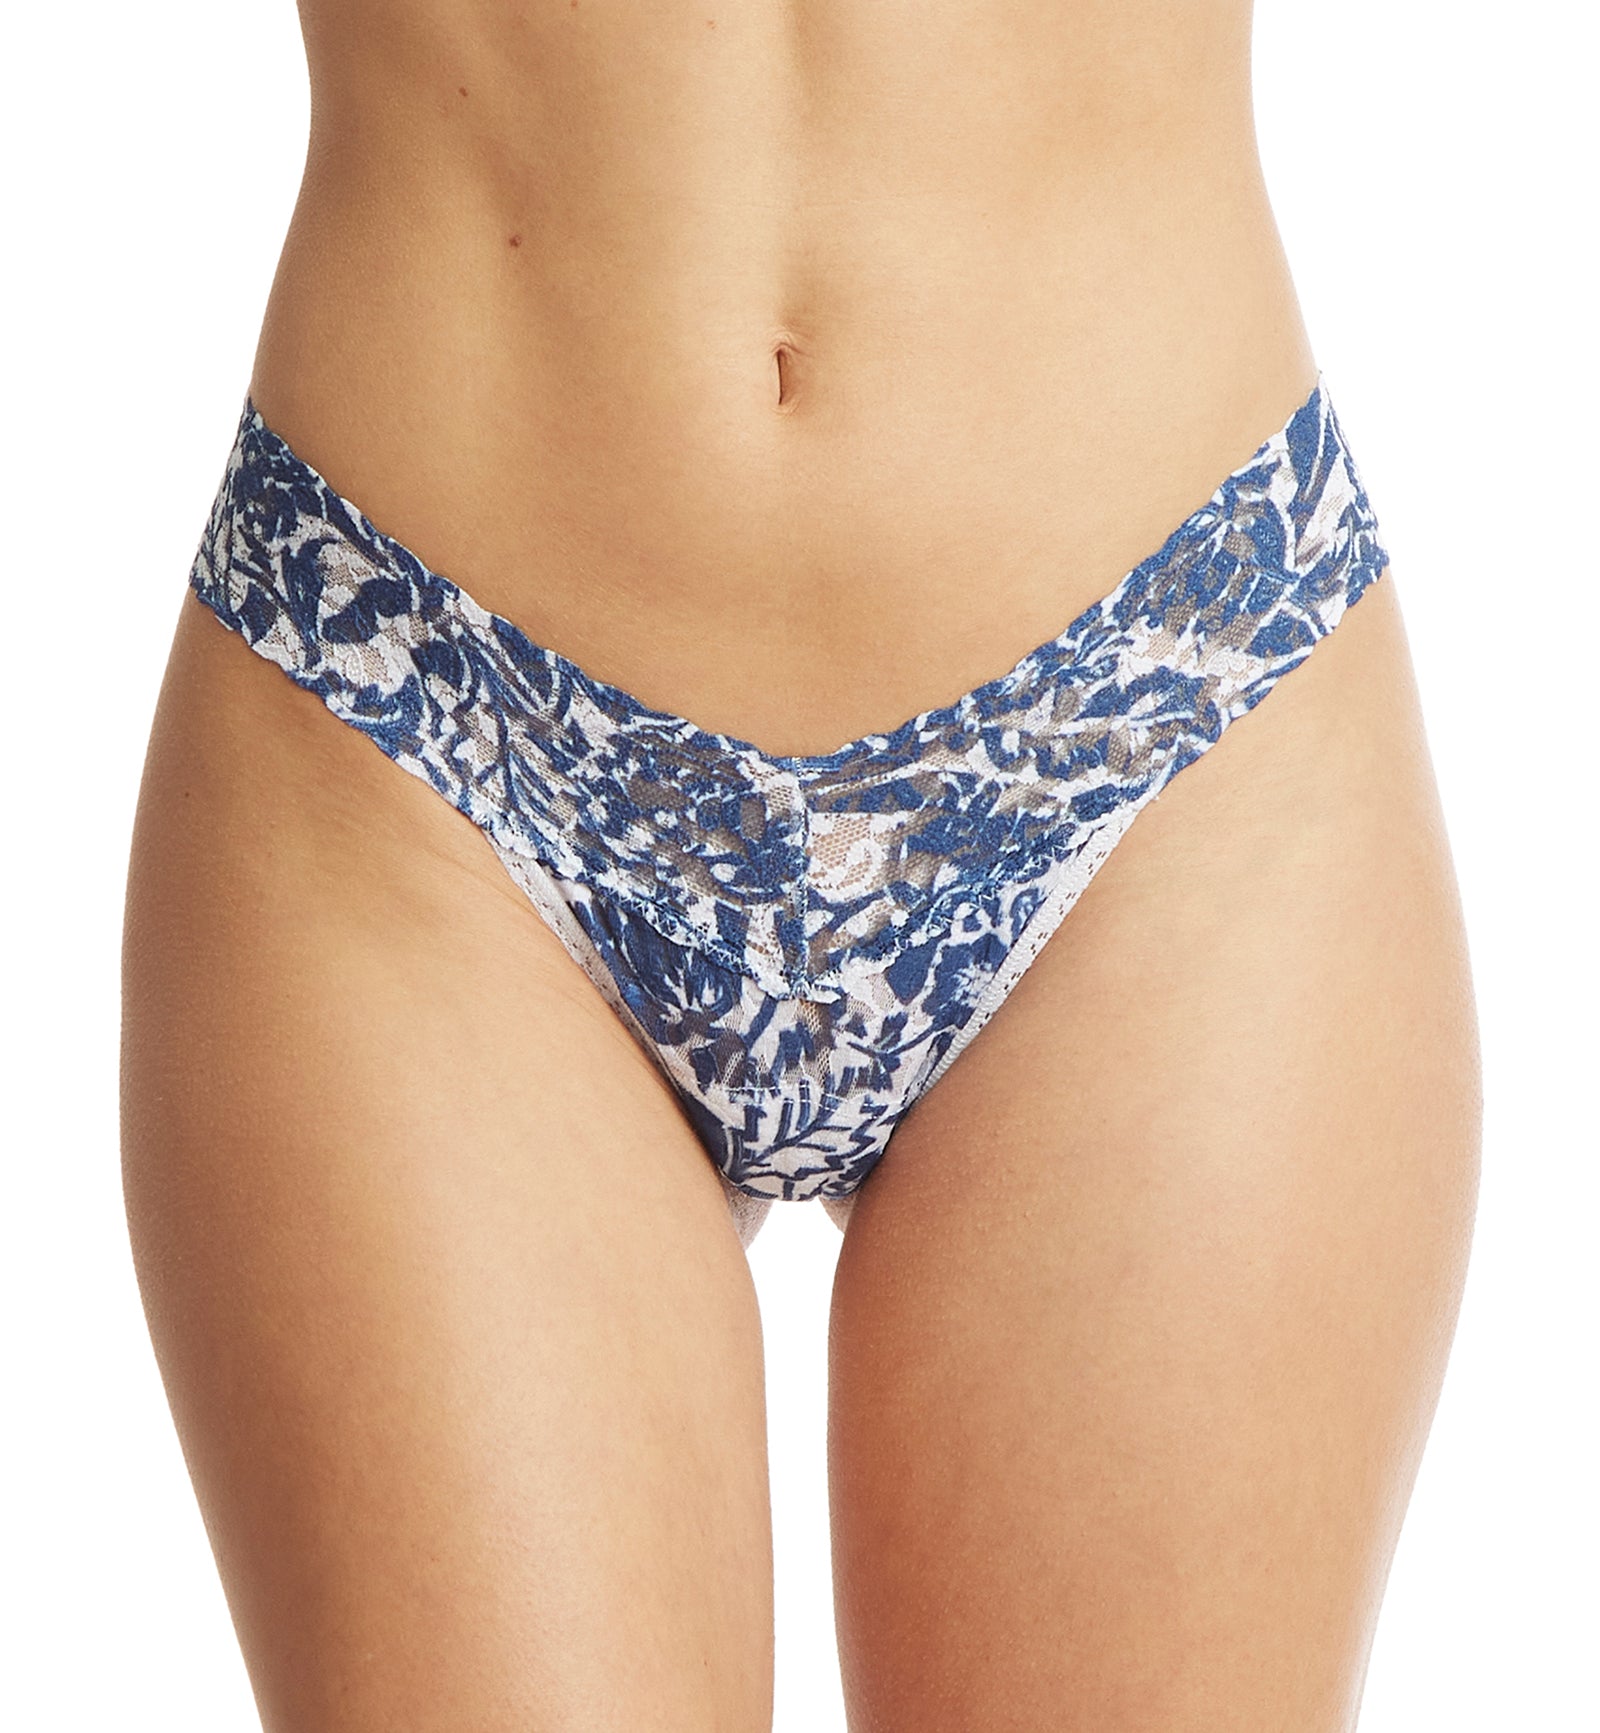 Hanky Panky Signature Lace Printed Low Rise Thong (PR4911P),Sketchbook Floral - Sketchbook Floral,One Size